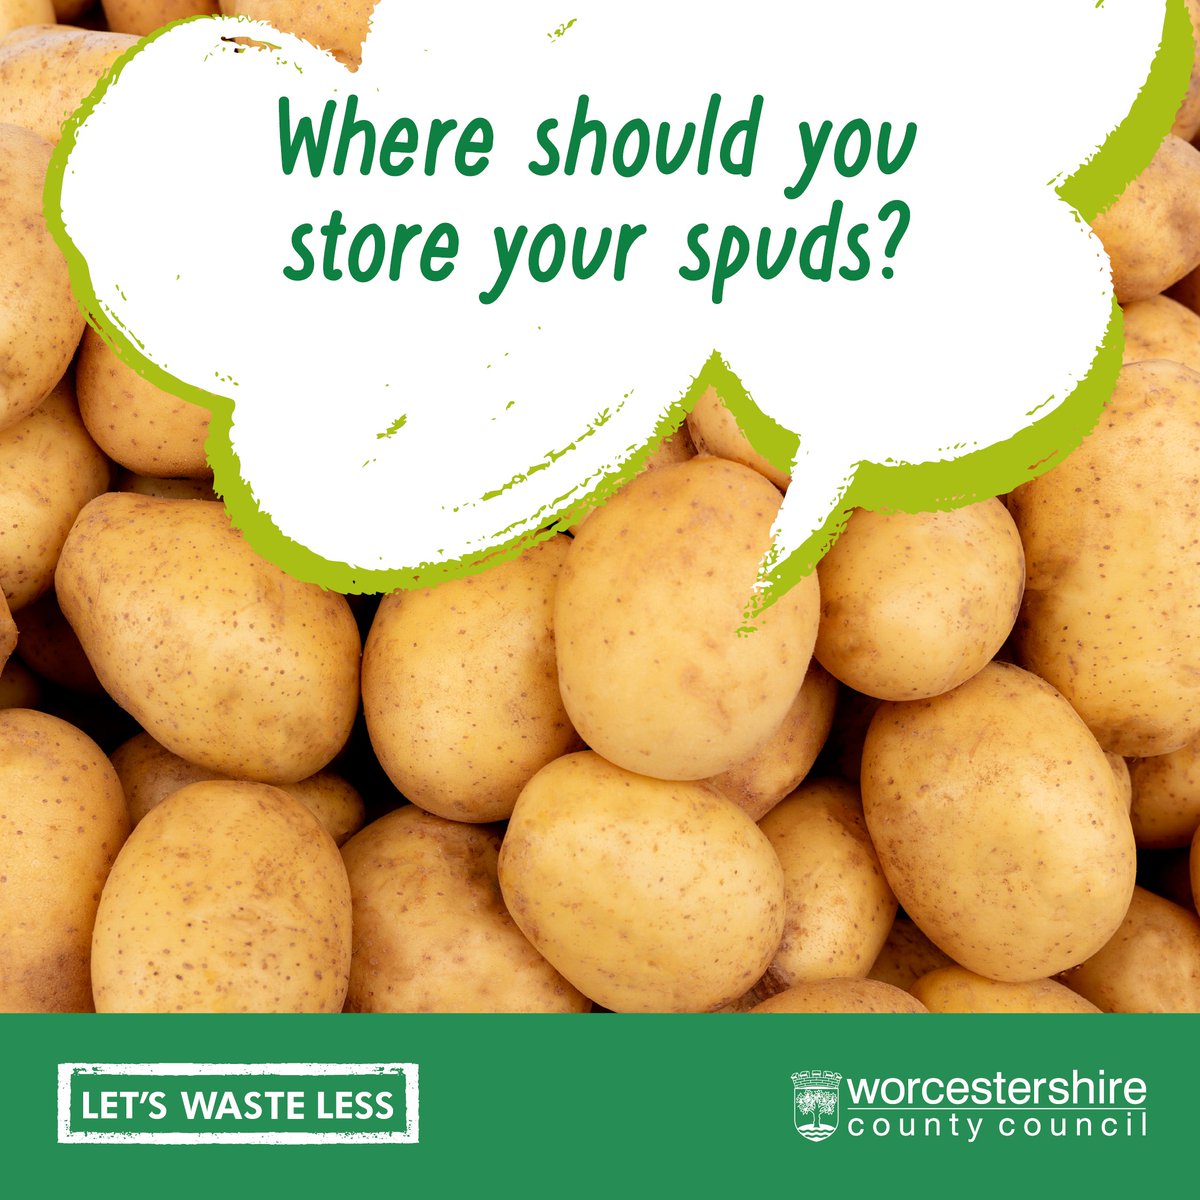 Fridge is best! A change in guidance means that now it’s recommended to store your potatoes in the fridge as this will keep them fresh for three times longer. lovefoodhatewaste.com/blog/storing-y… #SavvySpuds #FoodSavvyWorcestershire #letswasteless